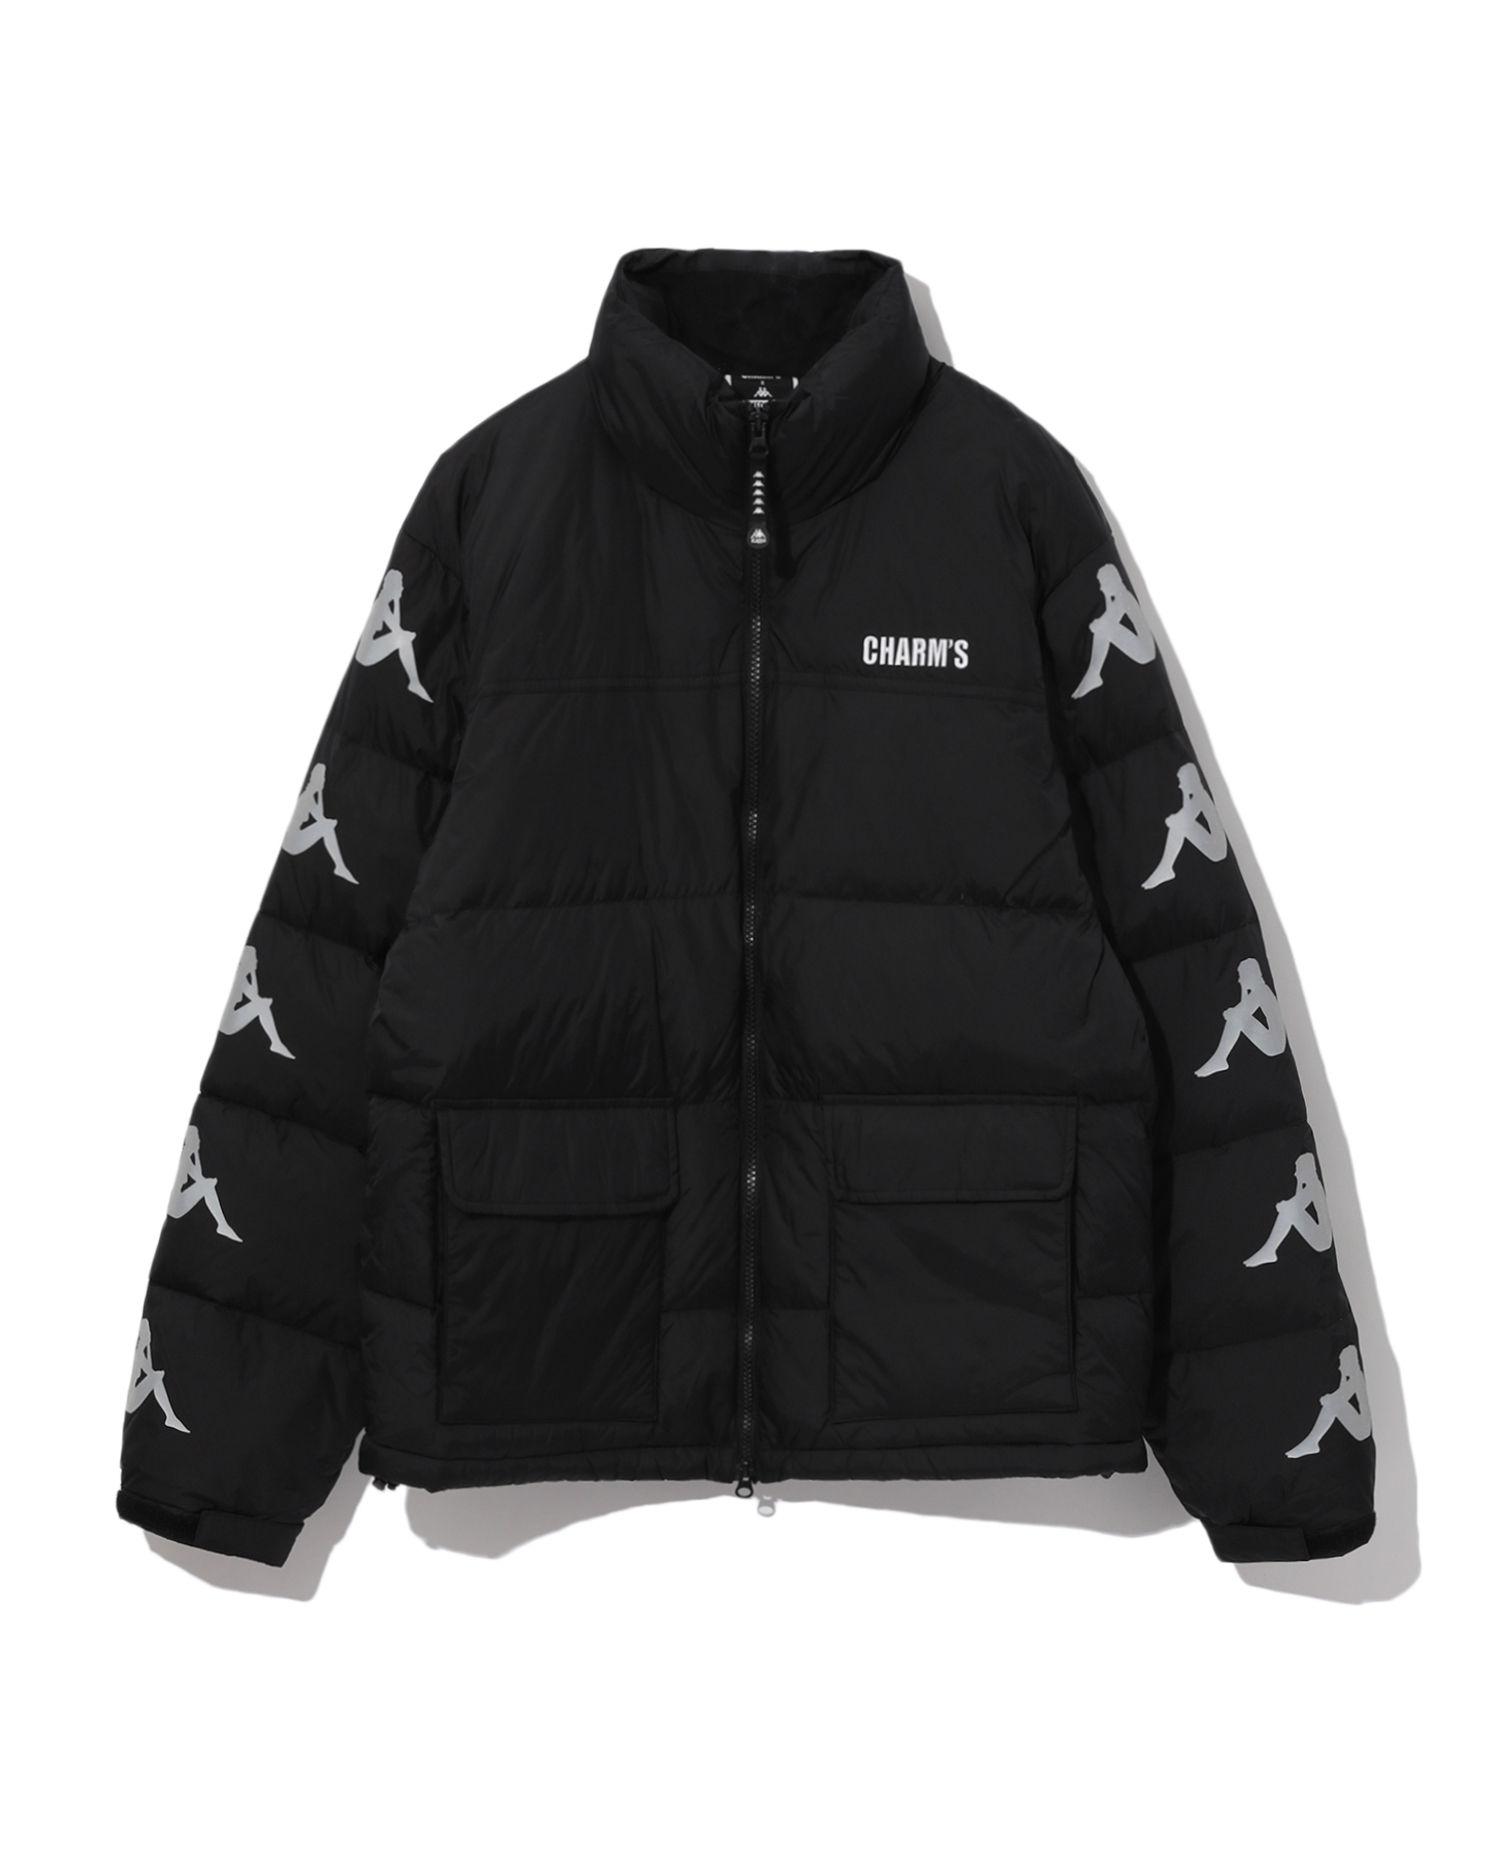 Logo sleeve puffer jacket by CHARM'S